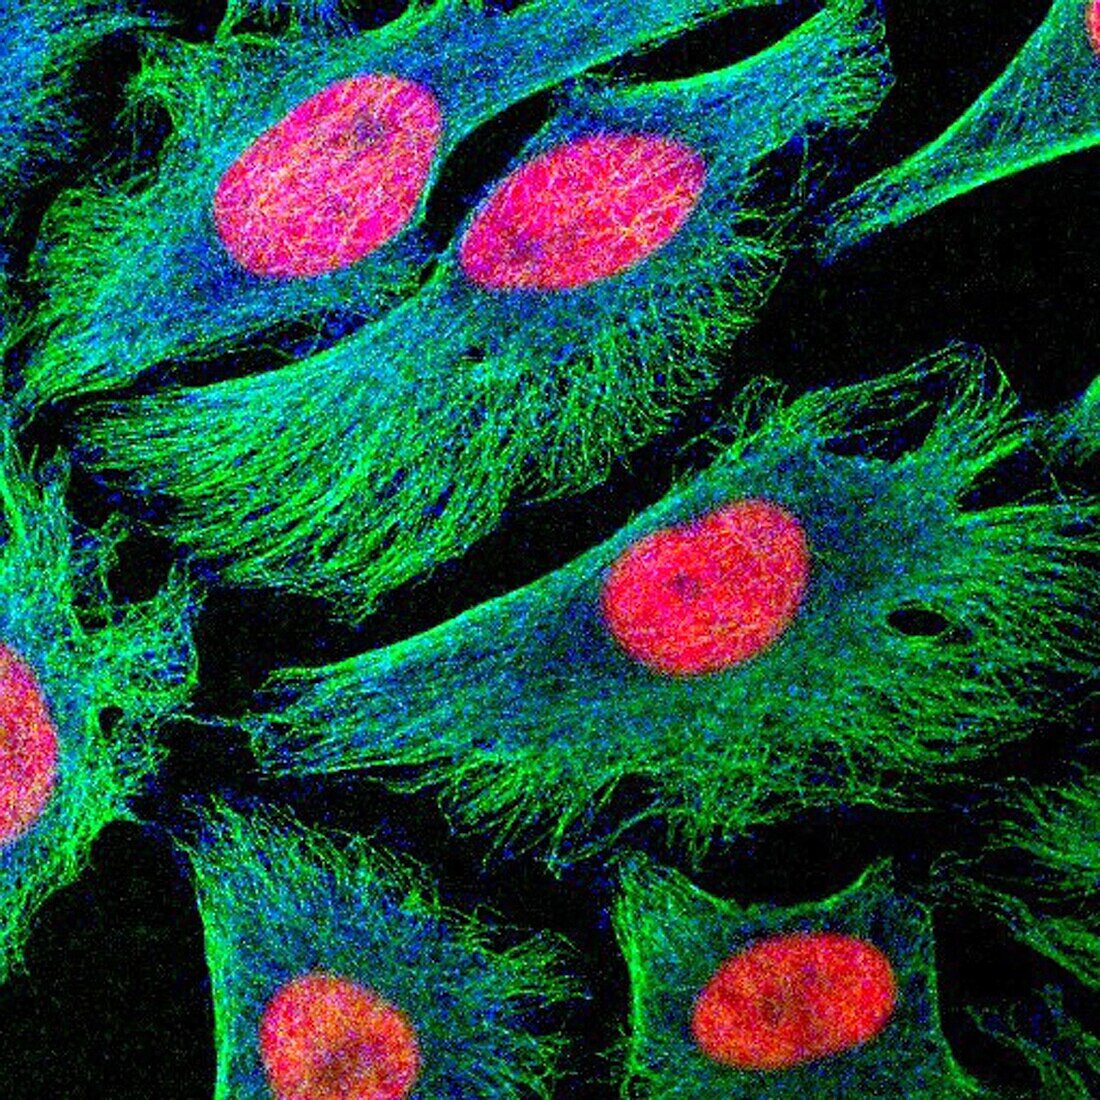 Human cancer cells in culture, light micrograph